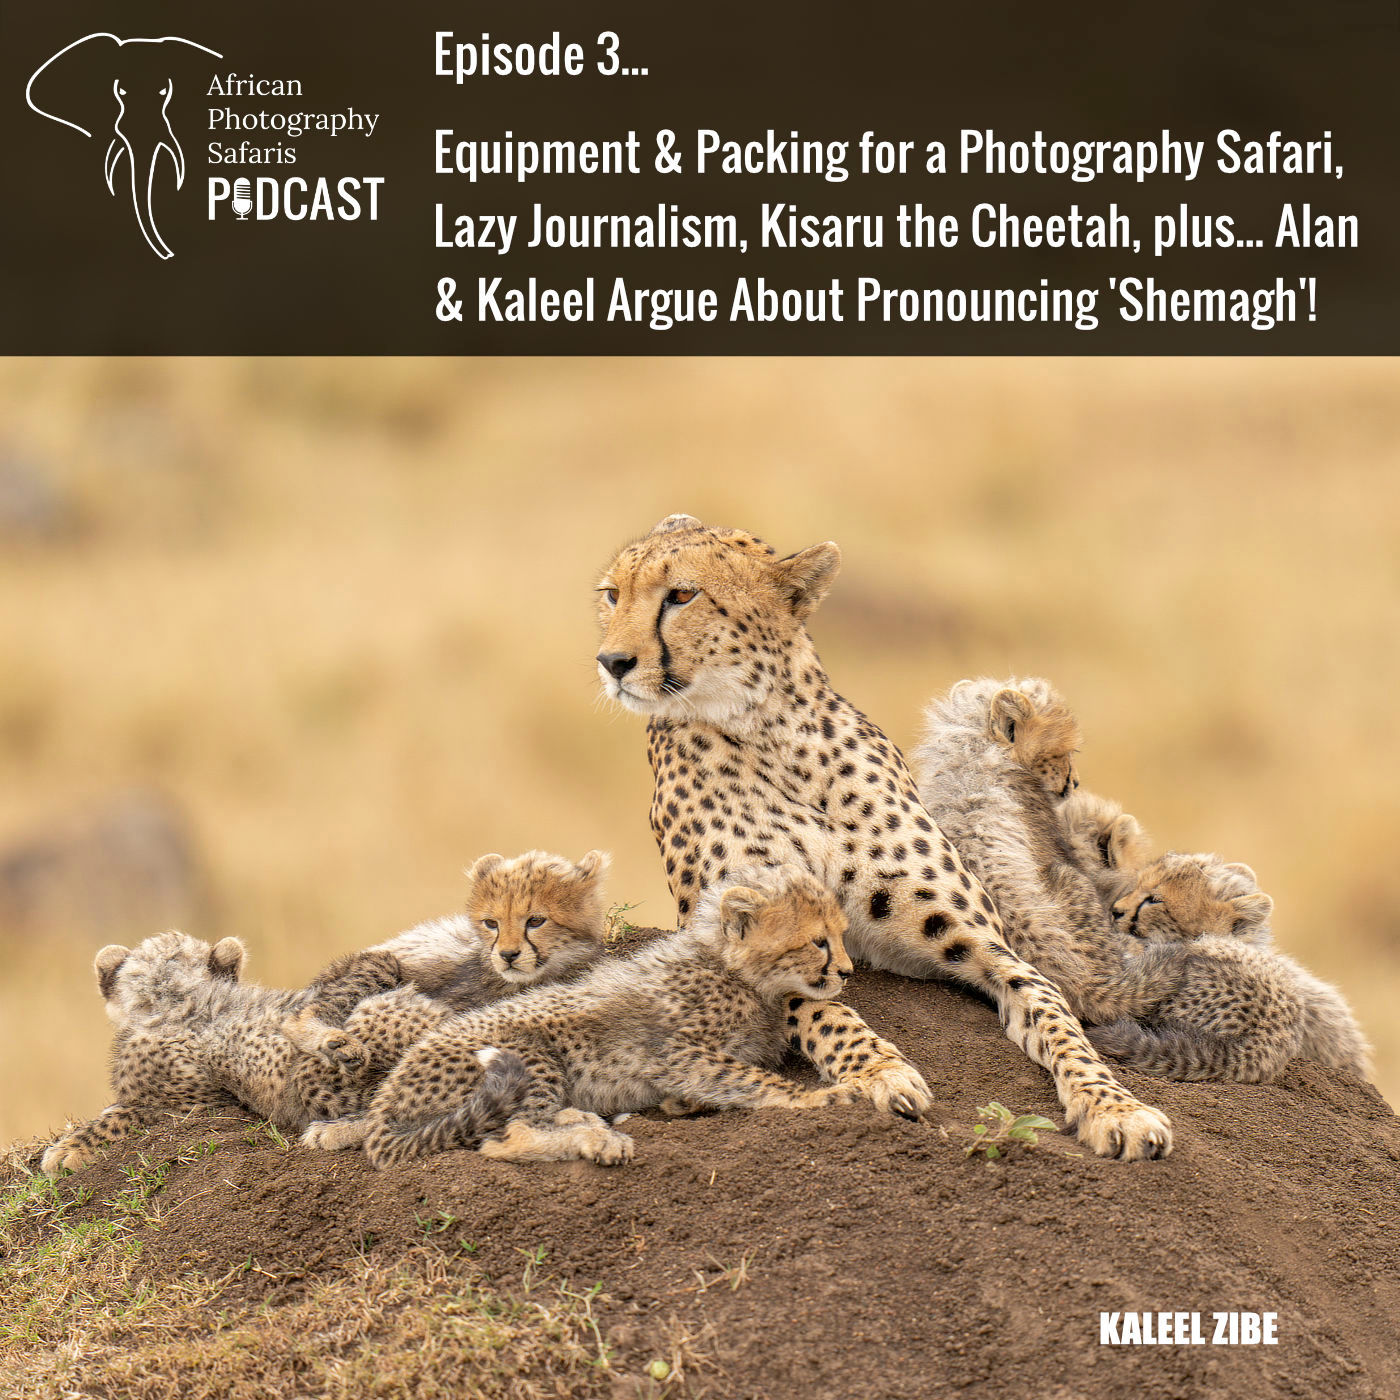 African Photography Safaris Podcast. Episode 3 - Equipment & Packing for a Photography Safari, Lazy Journalism, Kisaru the Cheetah.